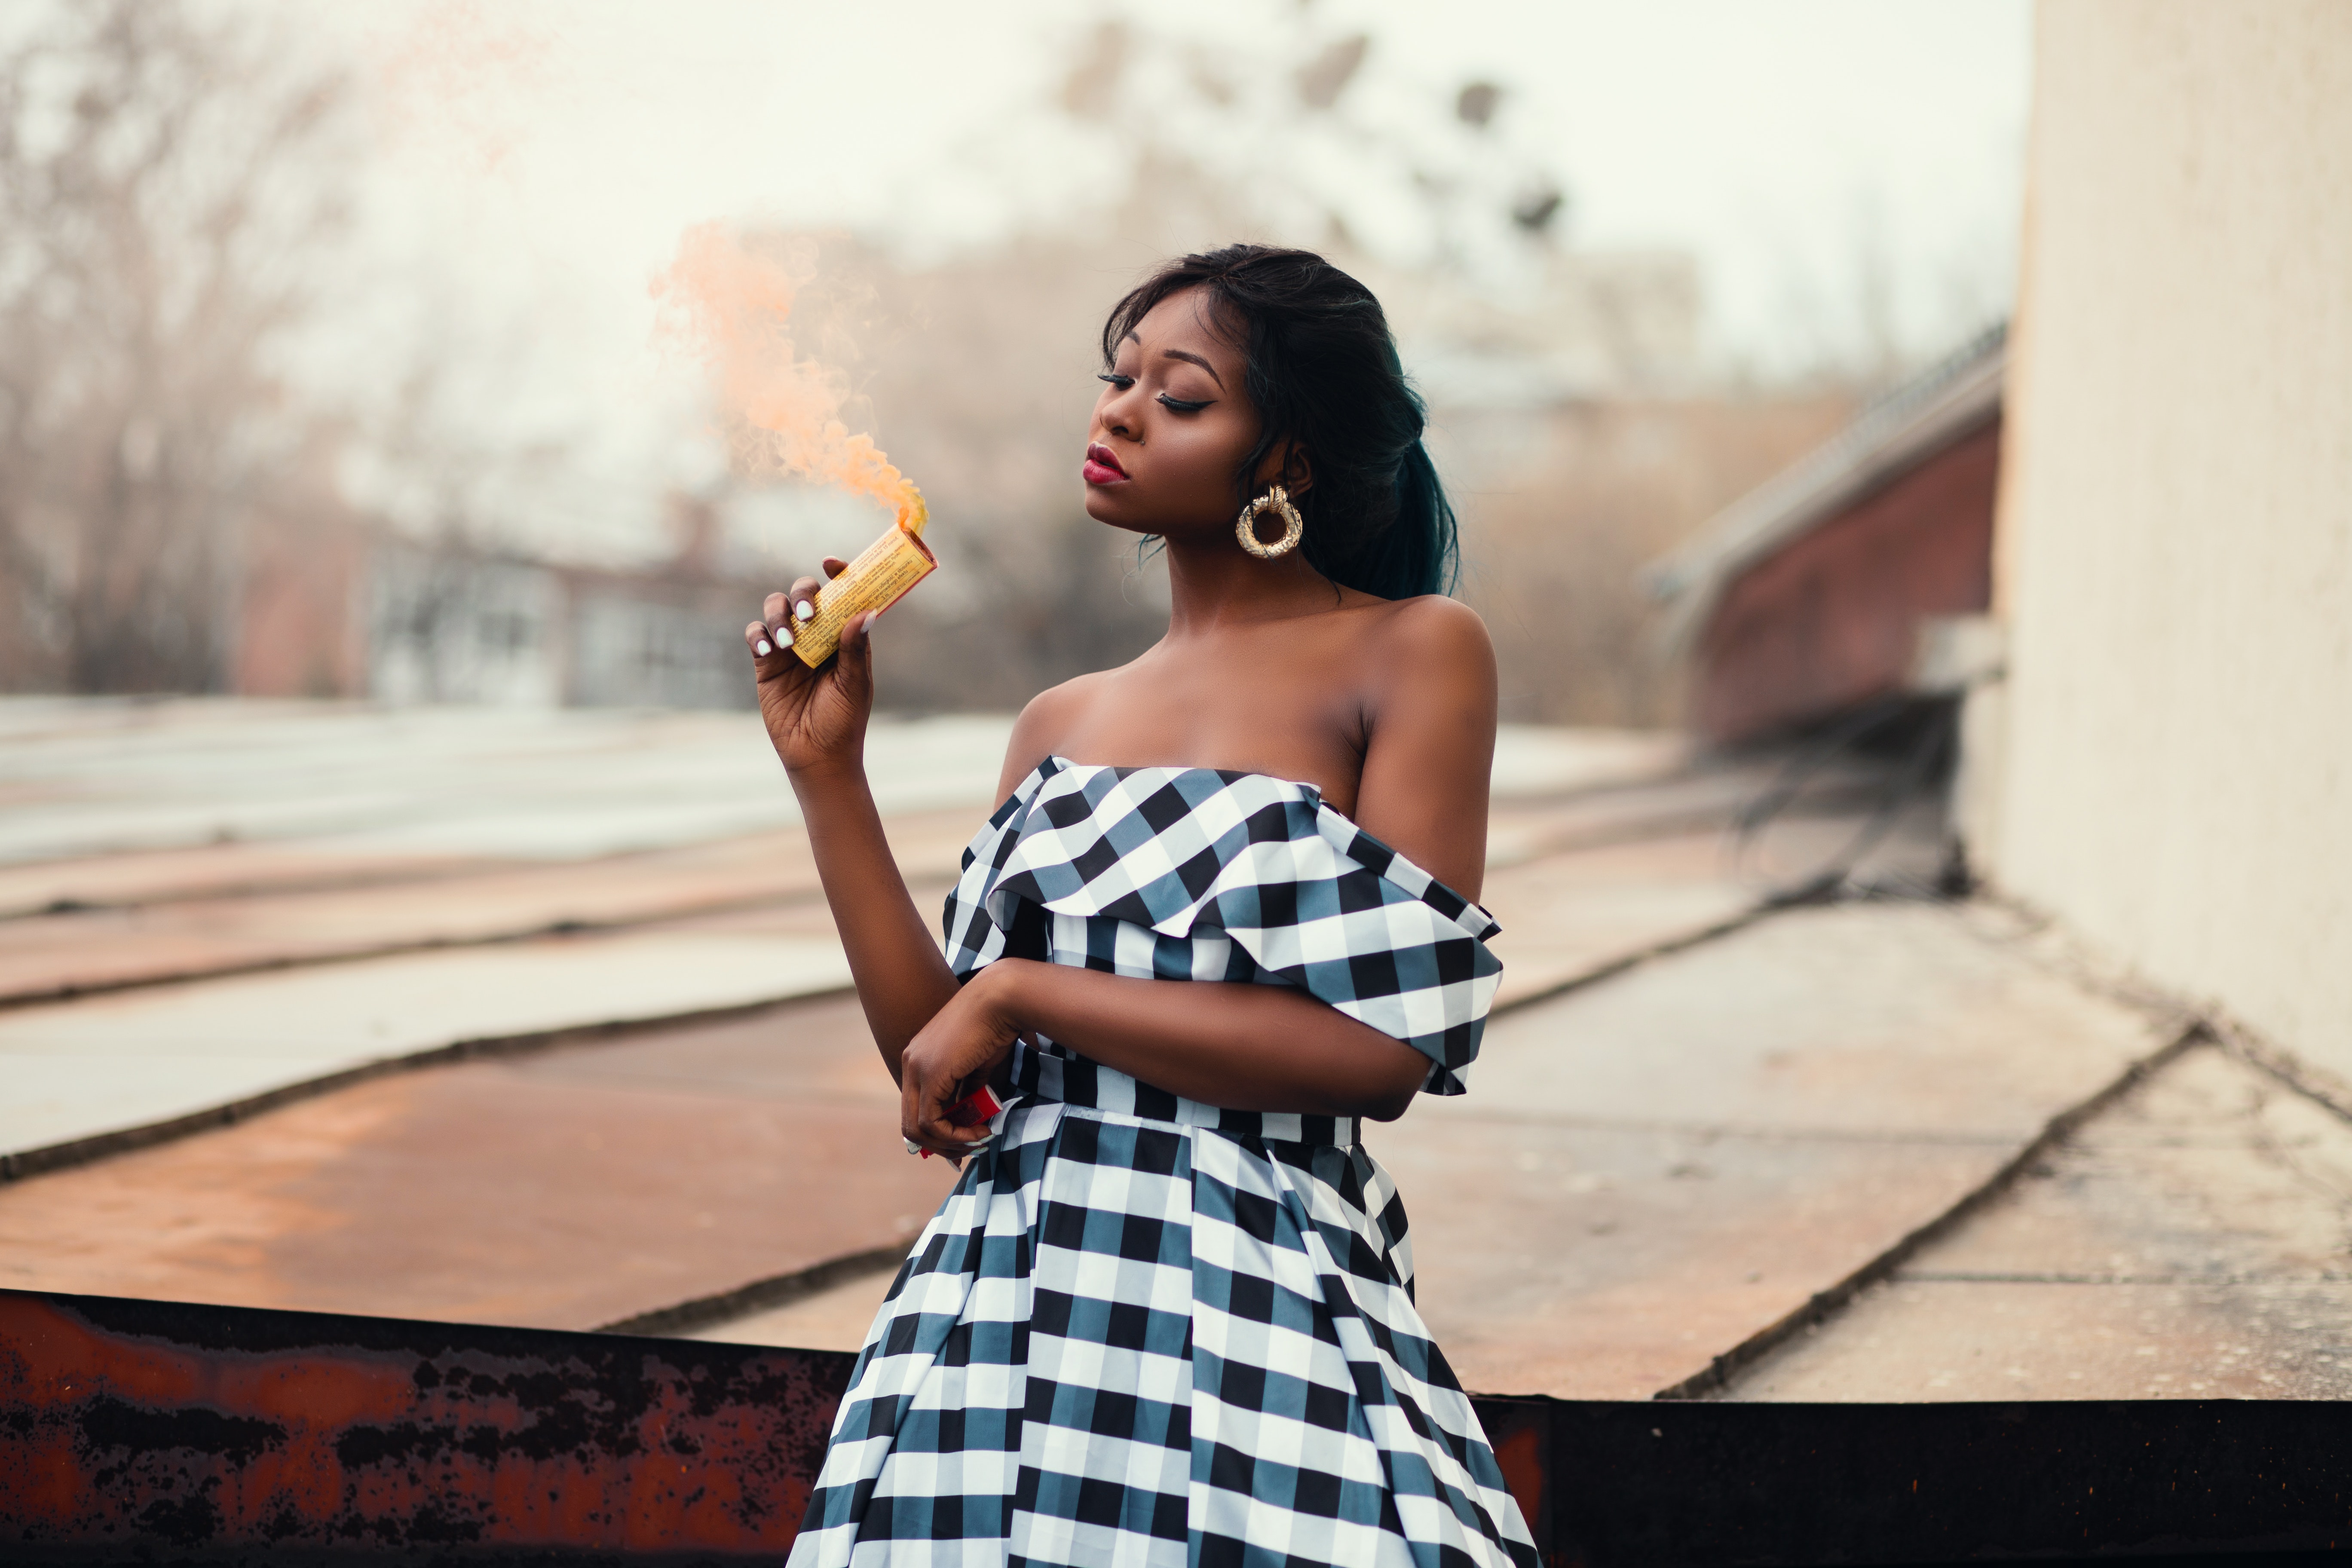 A woman in a black and white off-shoulder dress holding a smoke bomb